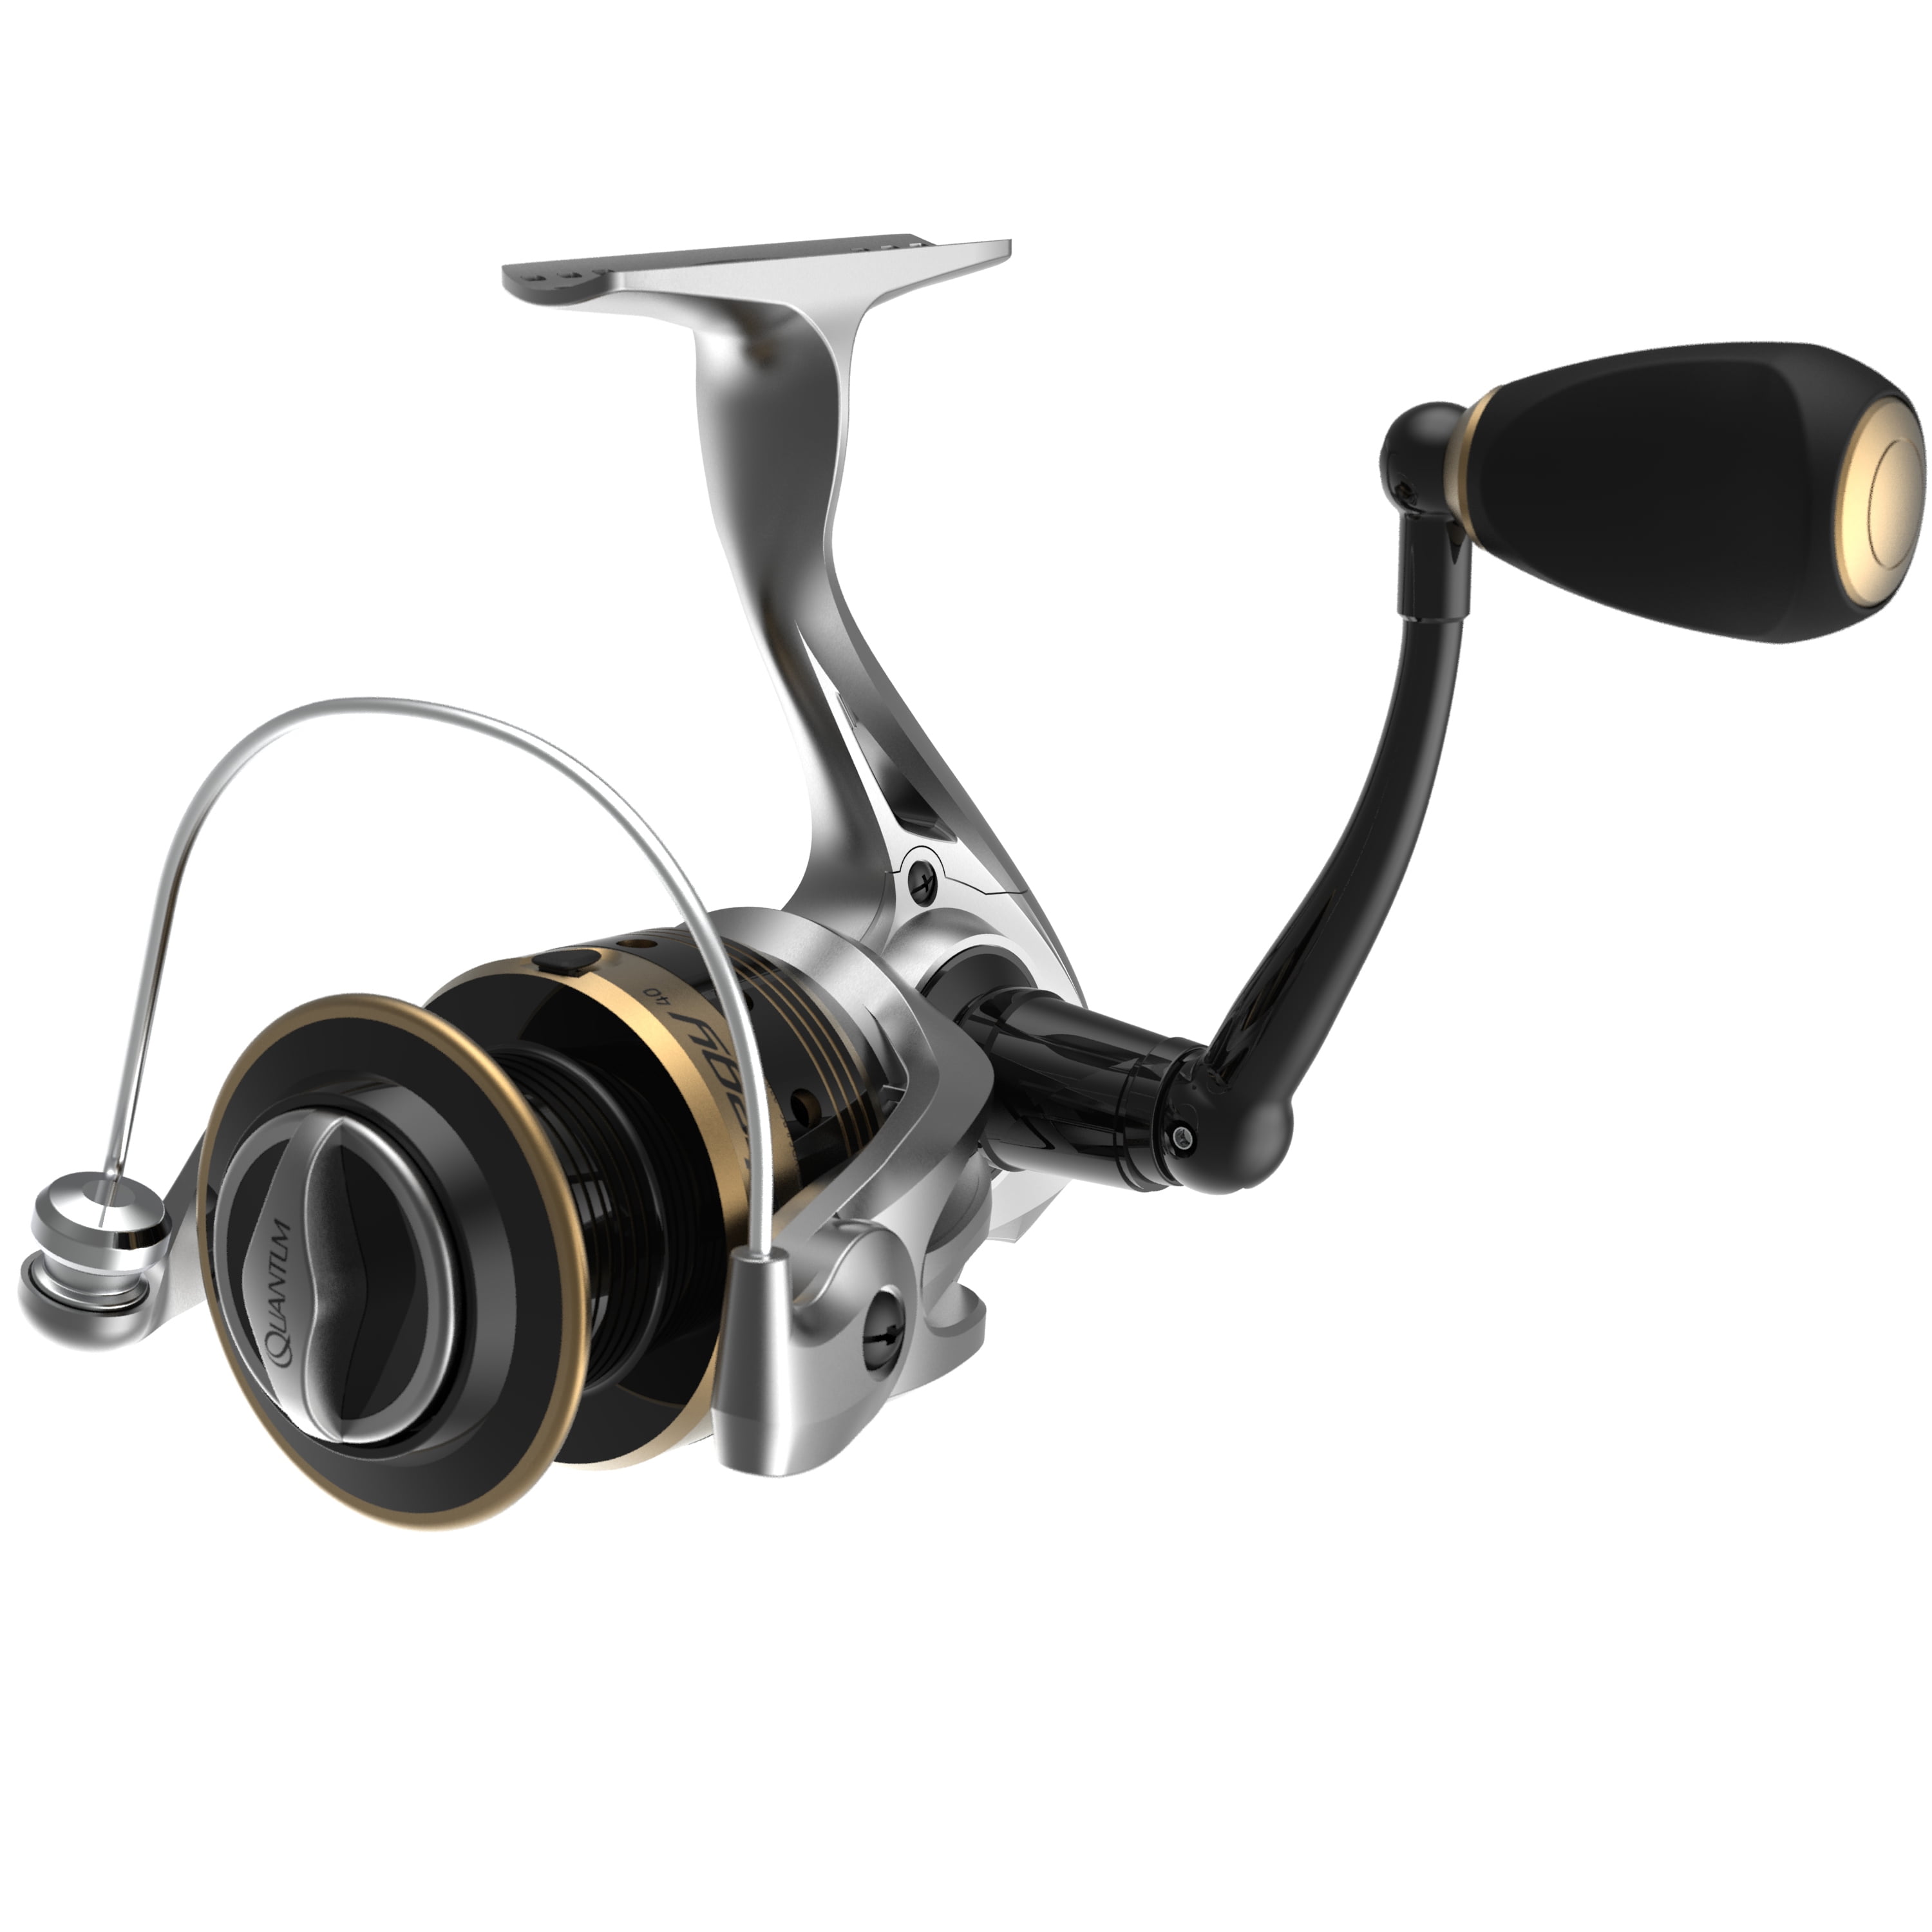 Quantum Strategy Spinning Fishing Reel, Size 20 Reel, Changeable Right- or  Left-Hand Retrieve, Lightweight Composite Body and Rotor, TRU Balance